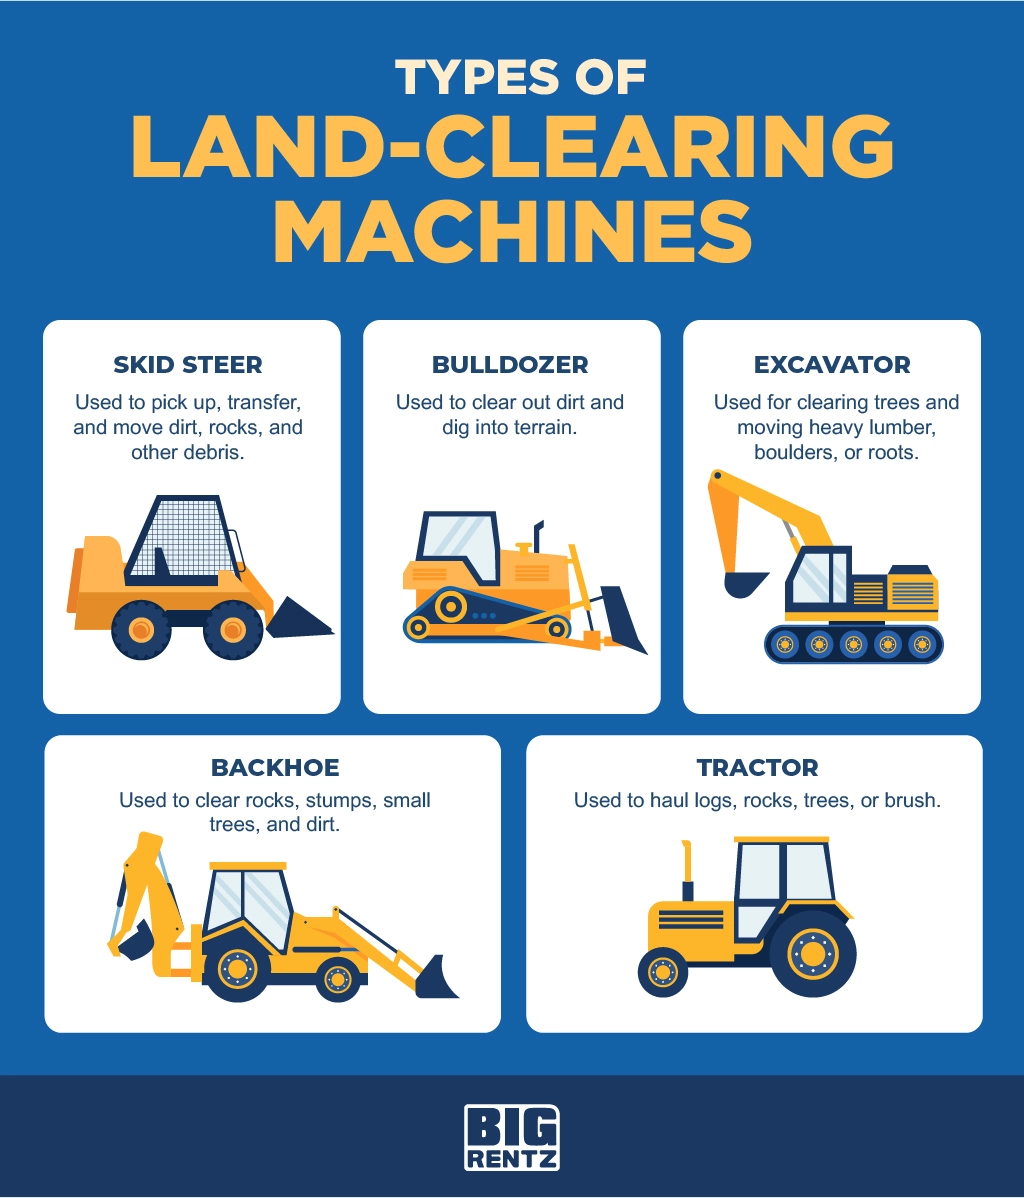 Land Clearing Equipment: Tools of the Trade